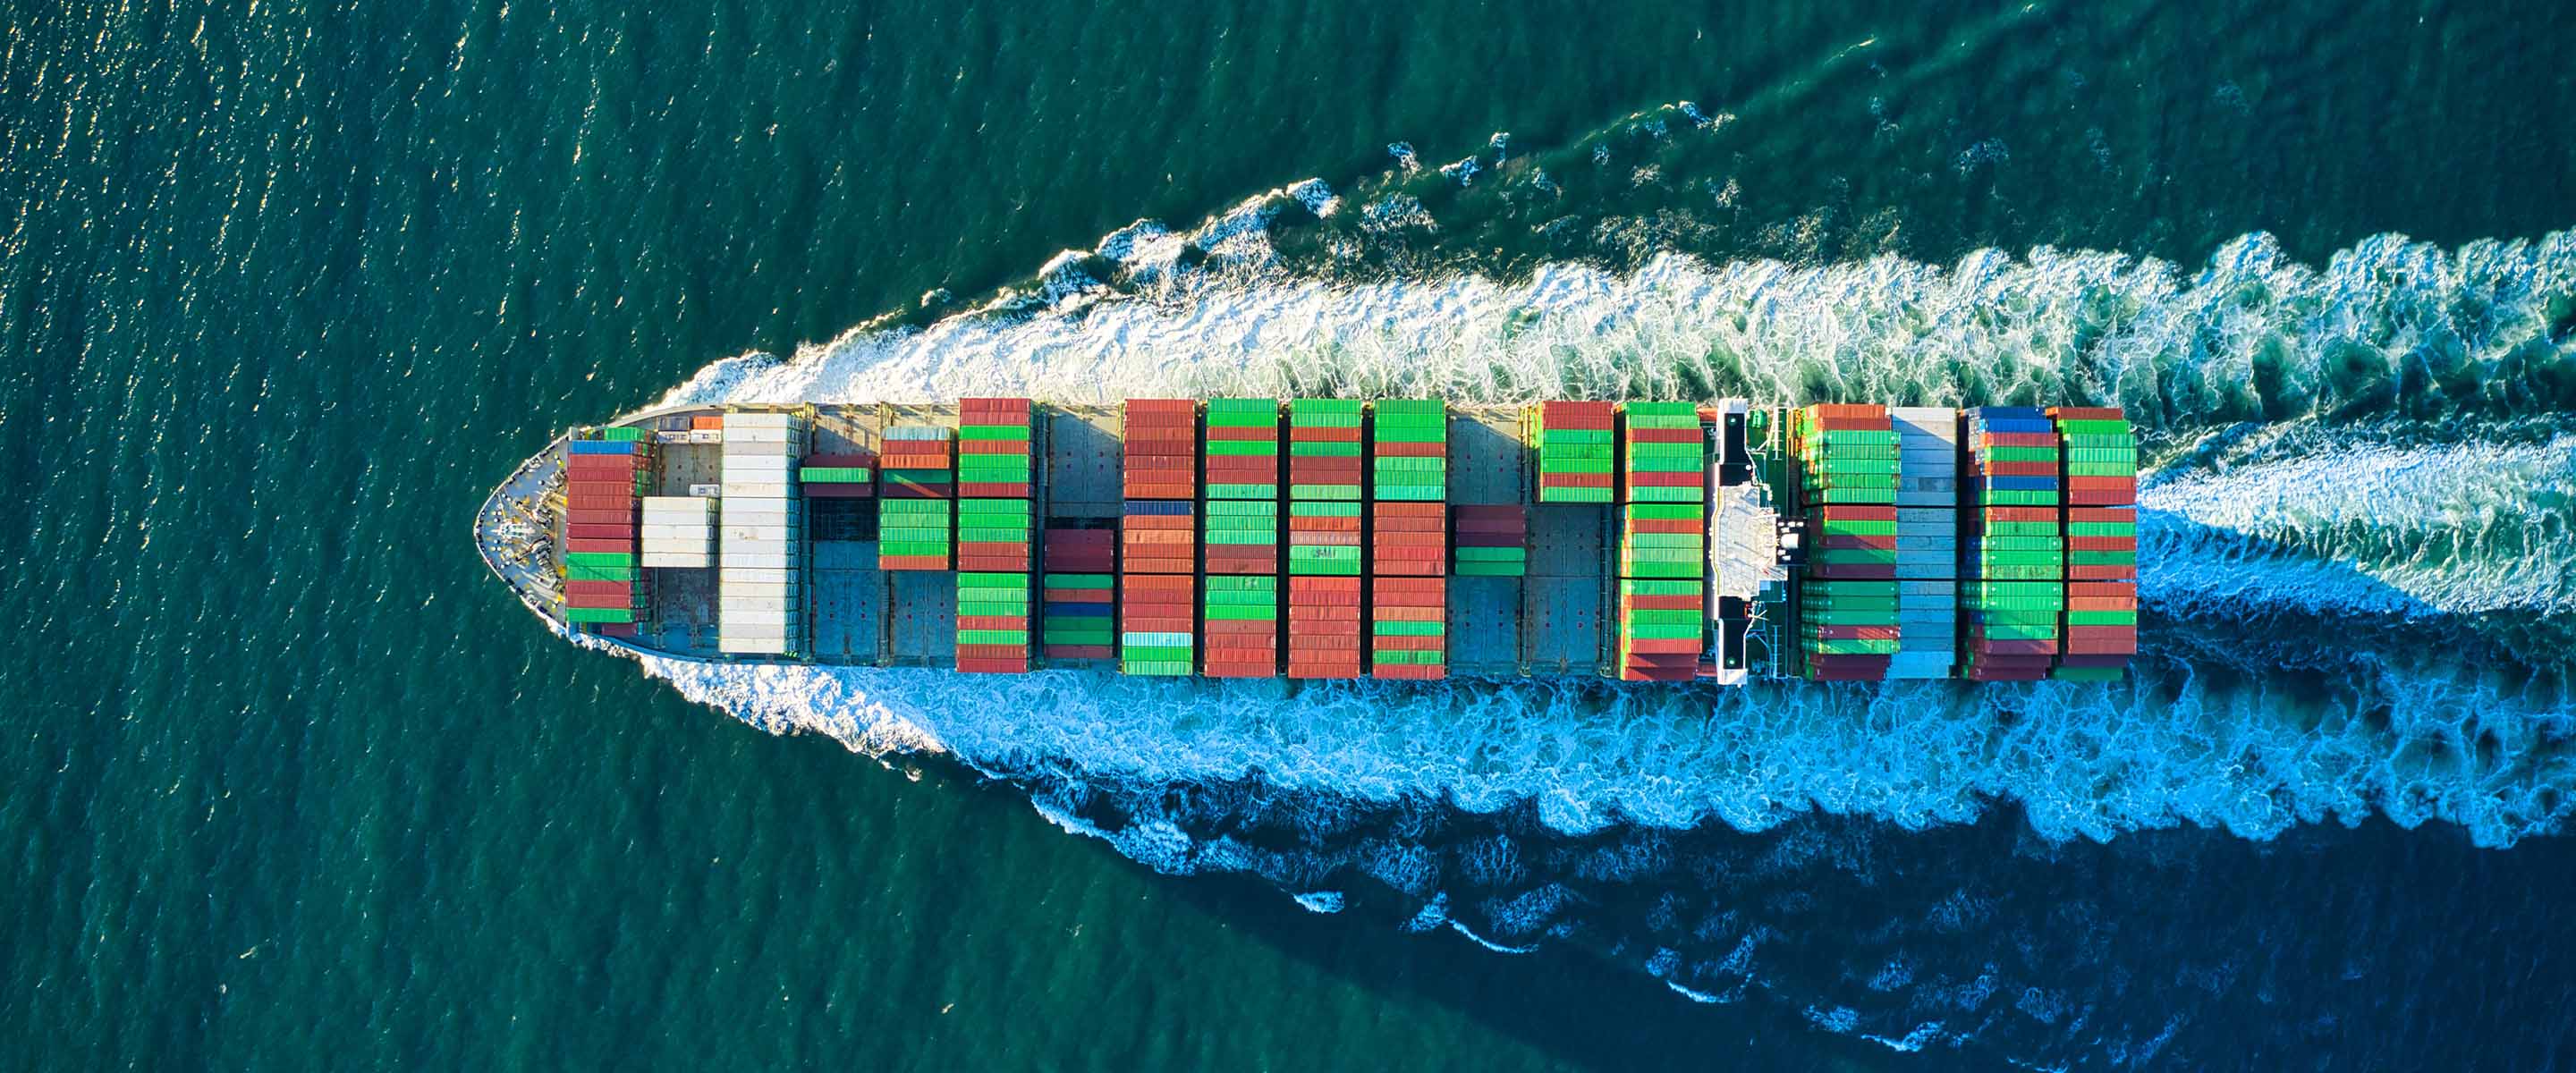 Overhead view of a cargo ship at sea.